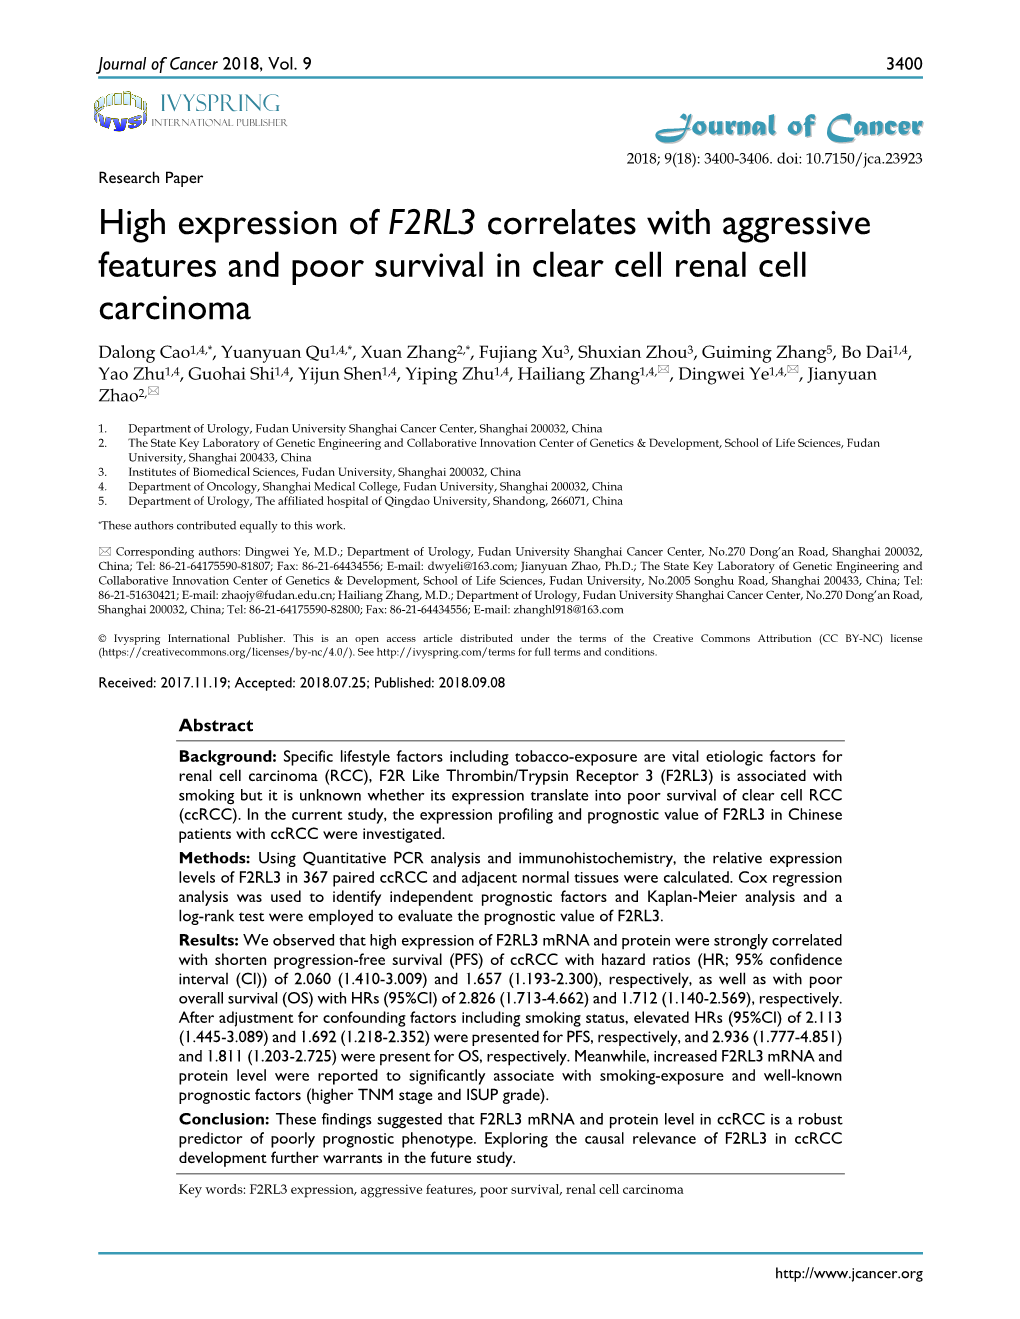 High Expression of F2RL3 Correlates with Aggressive Features and Poor Survival in Clear Cell Renal Cell Carcinoma